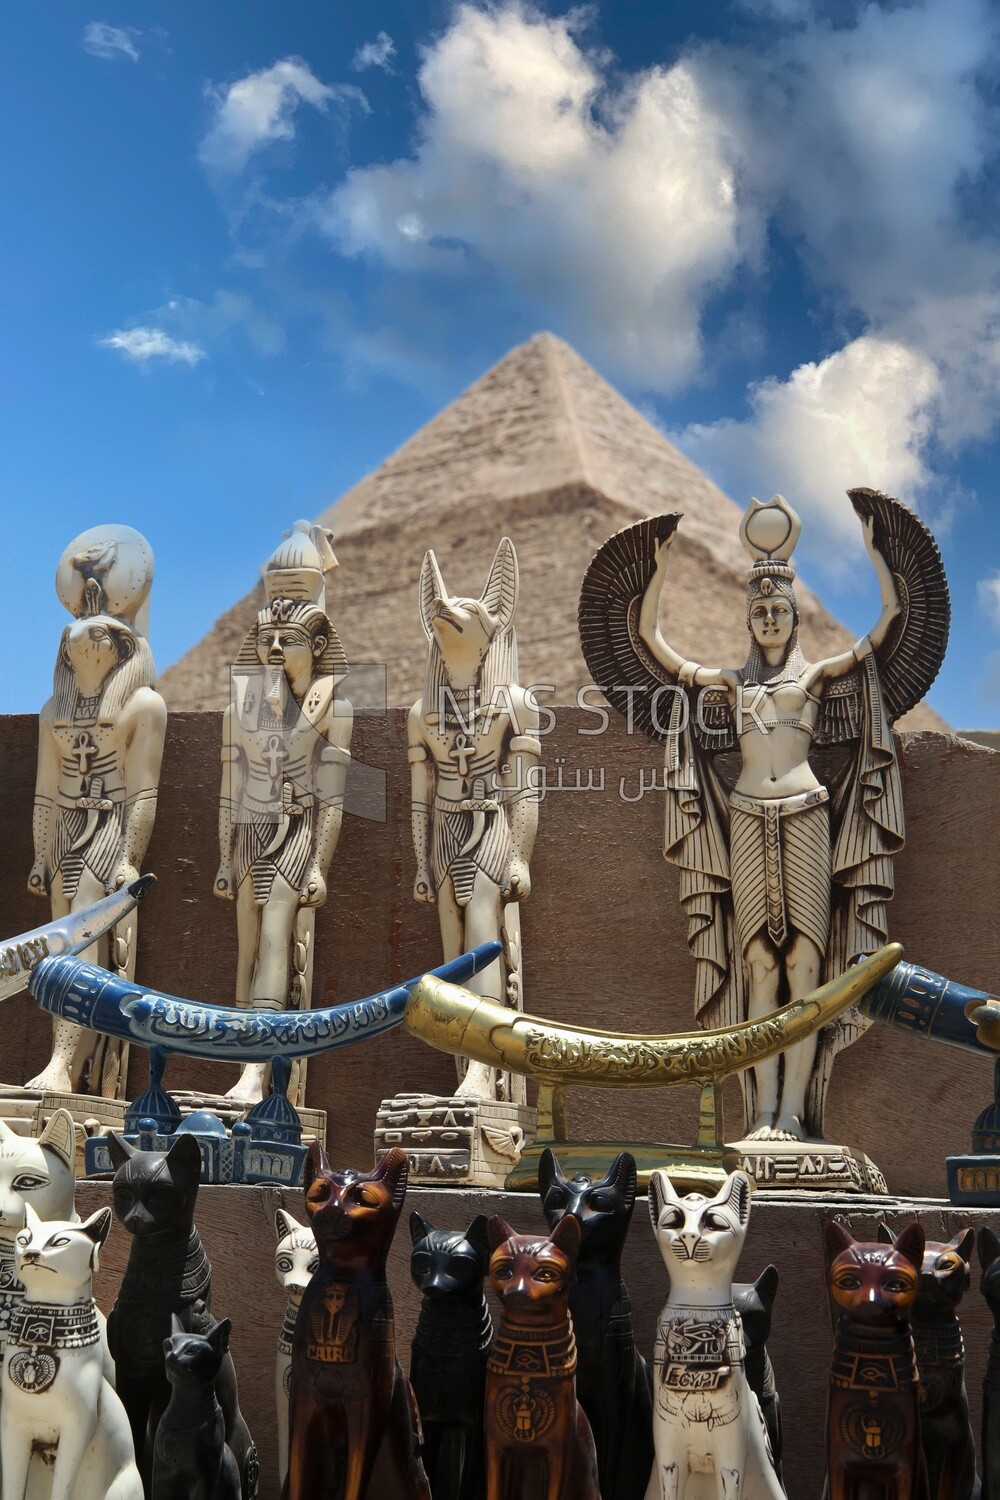 Store for for sale souvenirs in Giza pyramids, Tourism in Egypt, famous landmarks in Egypt